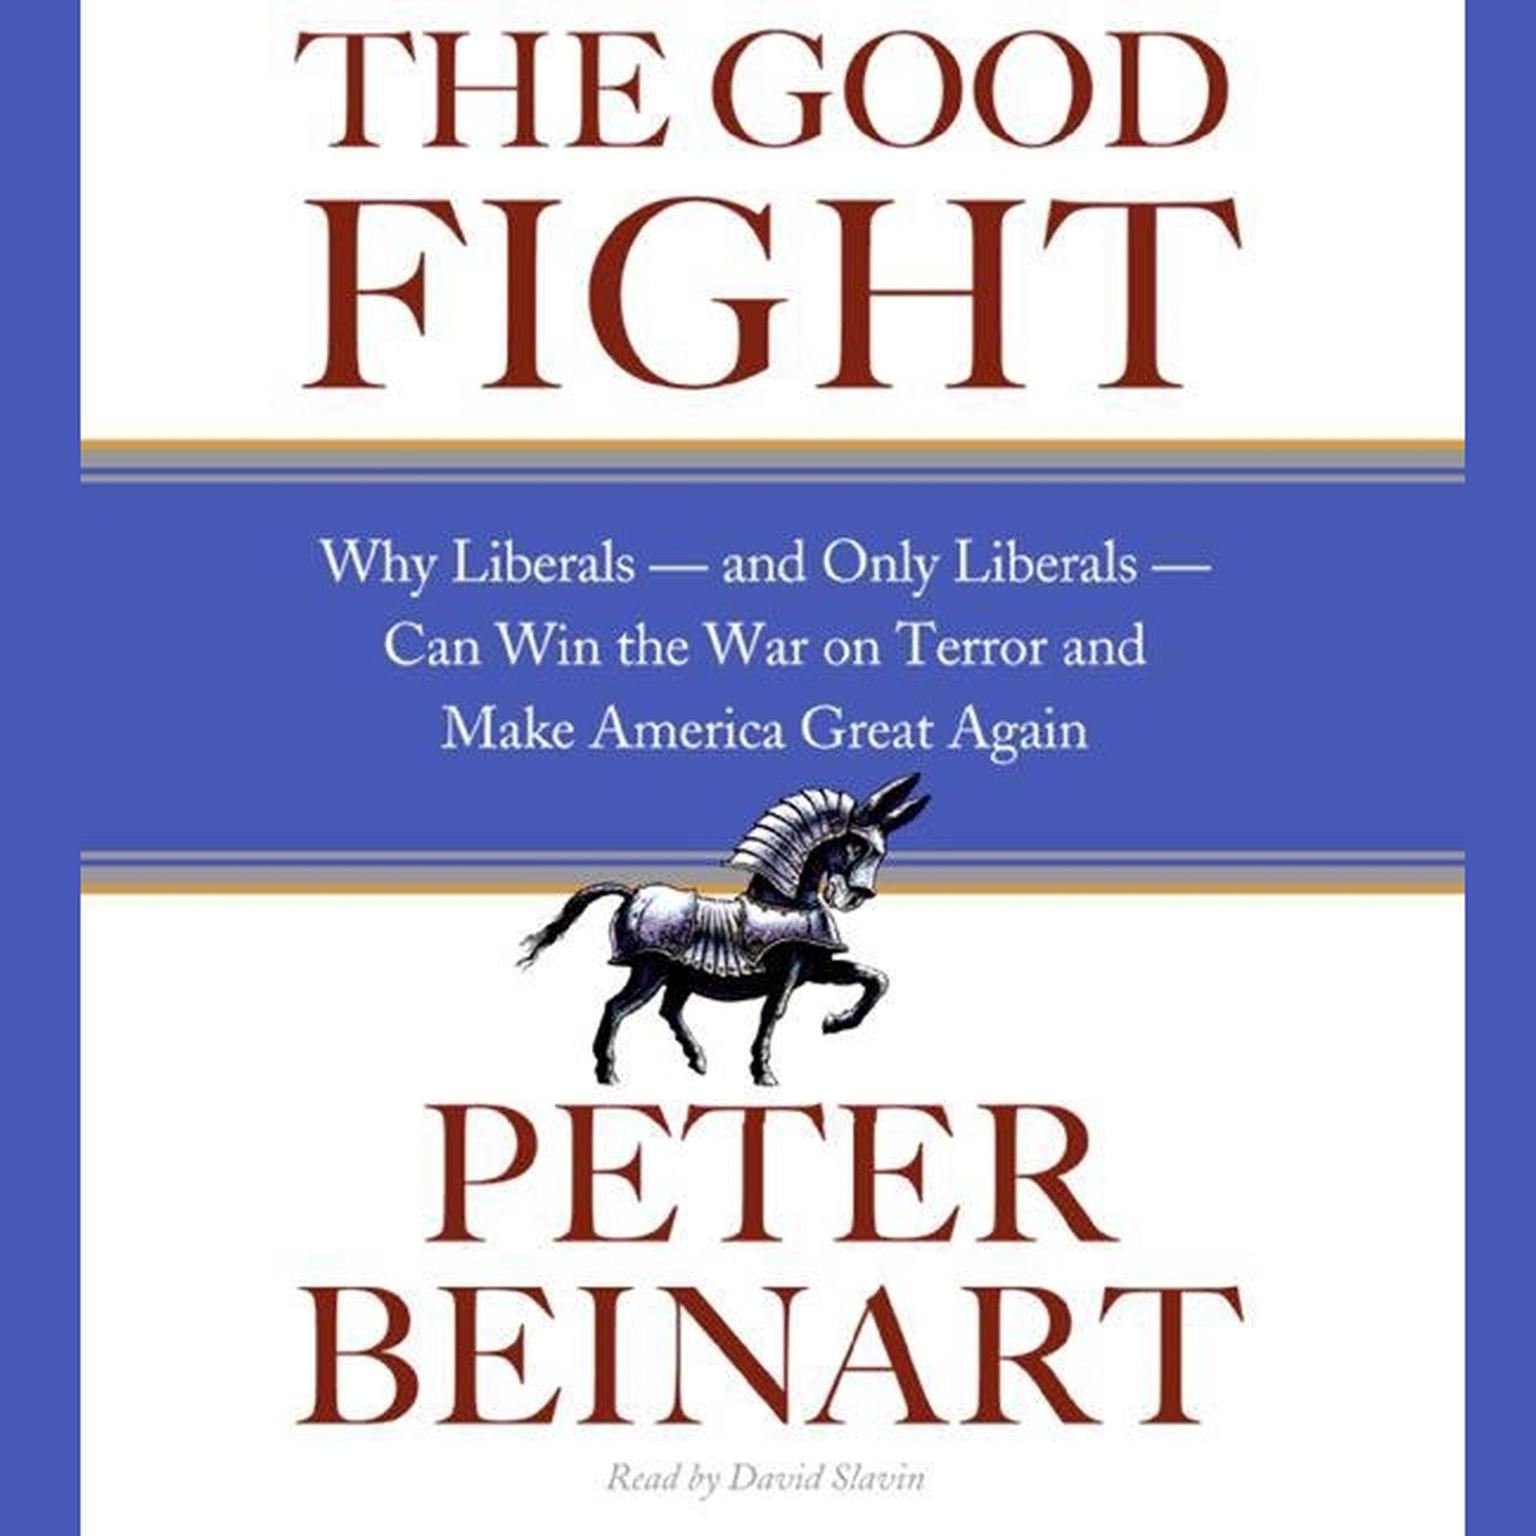 The Good Fight (Abridged): Why Liberals---and Only Liberals---Can Win the War on Terror and Make America Great Again Audiobook, by Peter Beinart